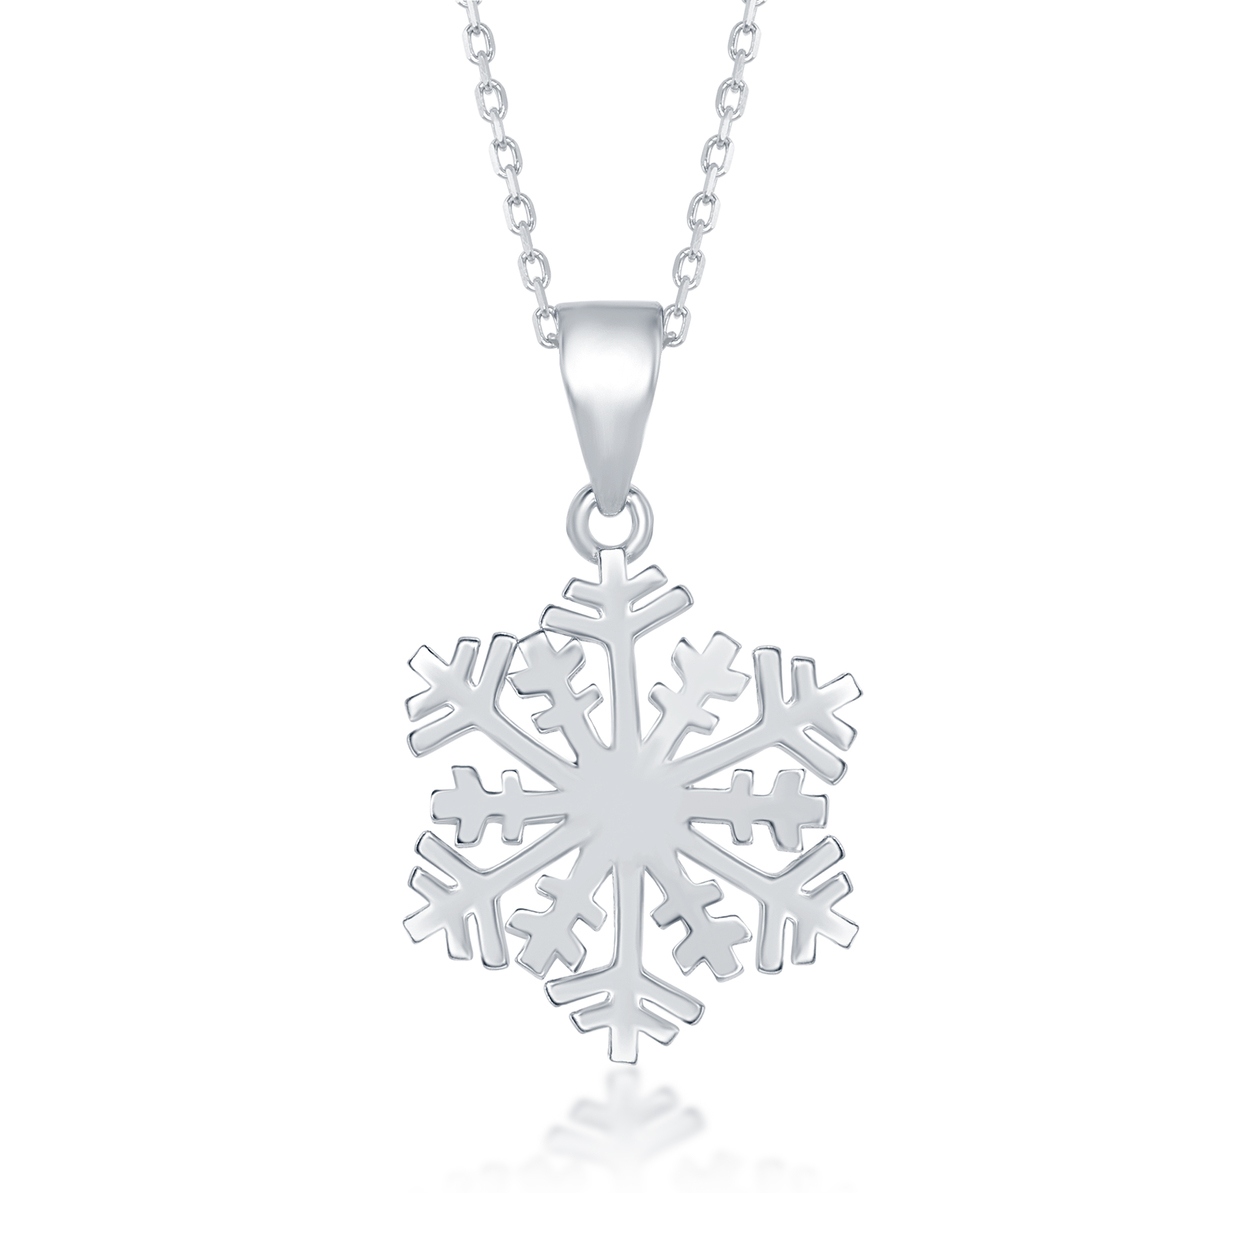 Shiny Sterling Silver Snowflake Pendant with Chain - J-2456